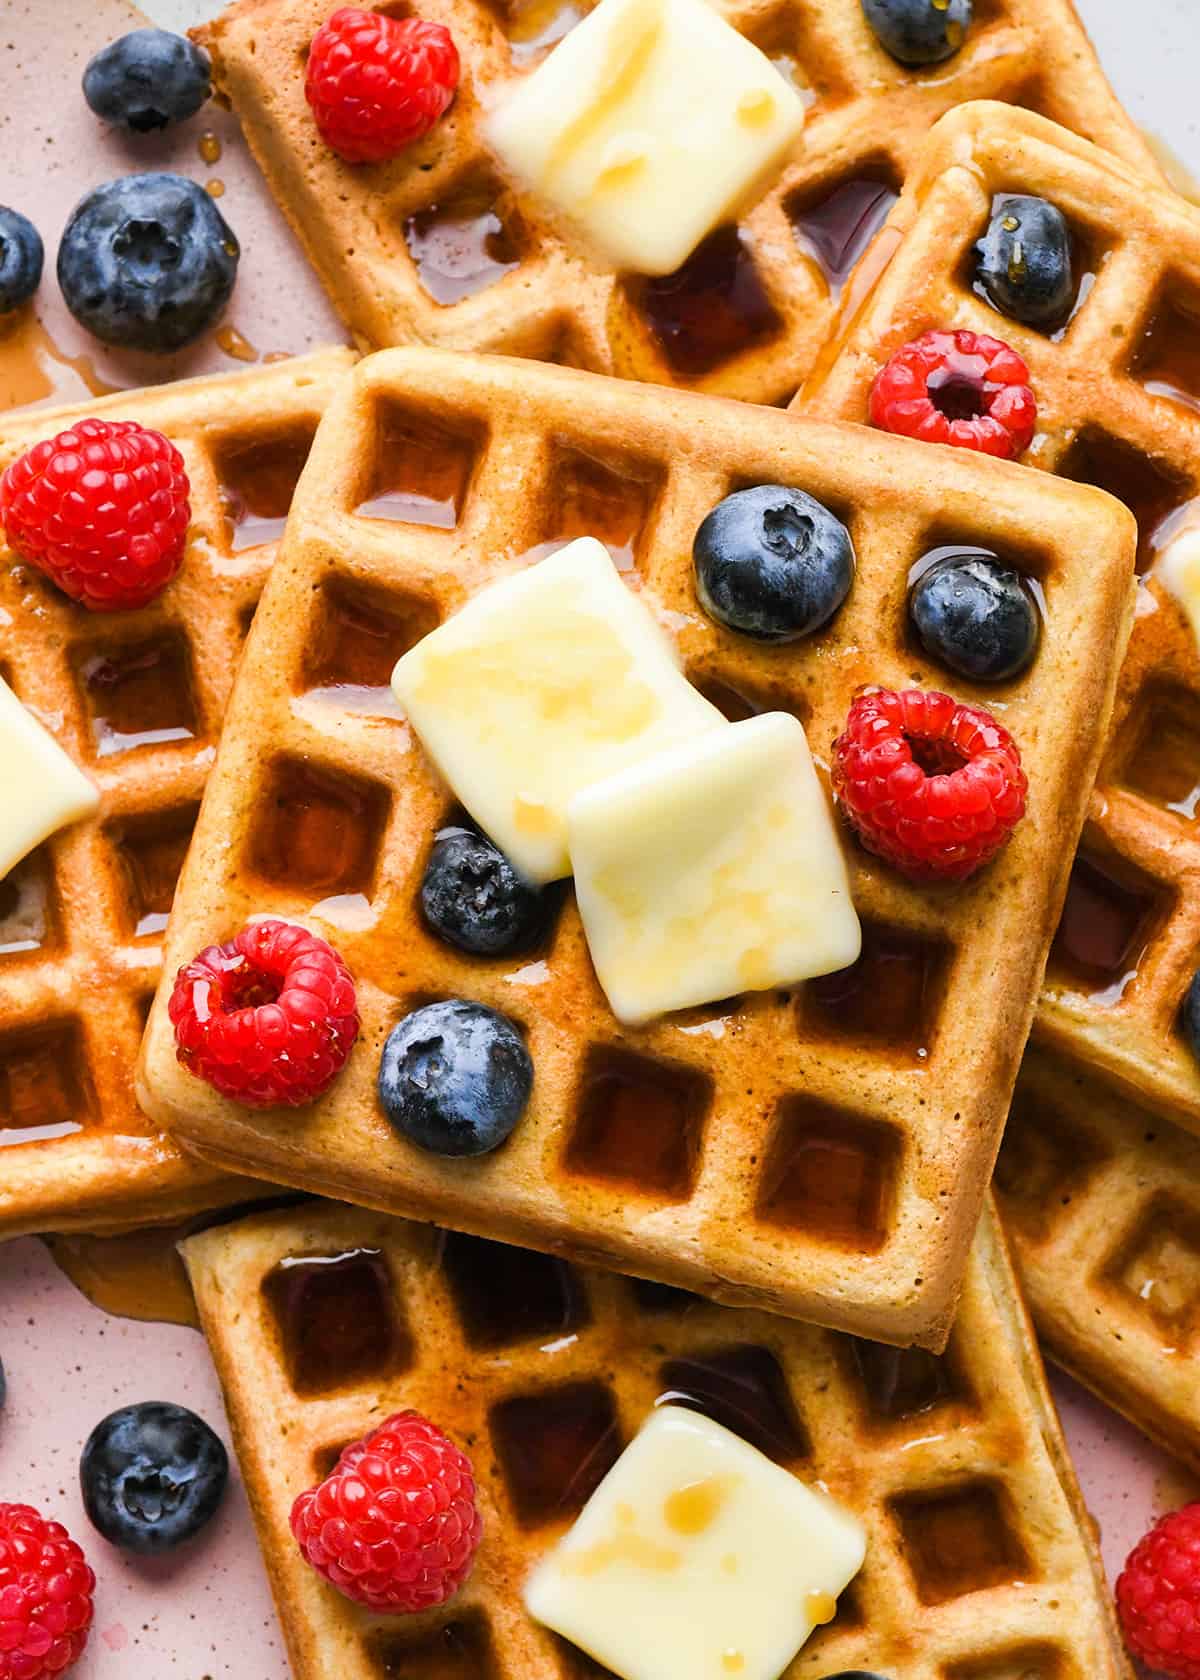 6 waffles on a plate with syrup, butter and berries